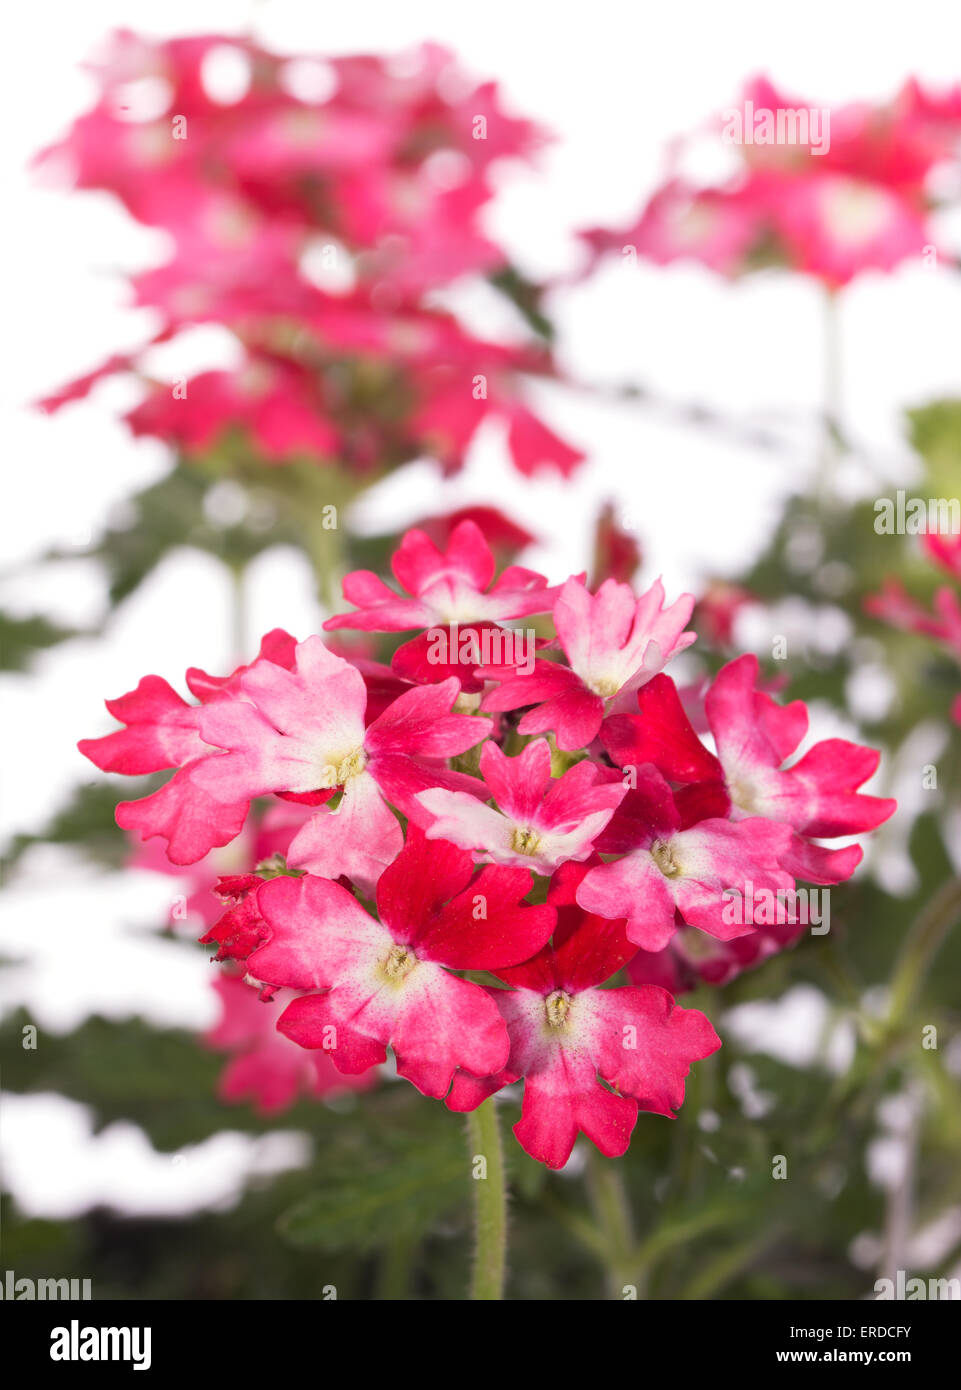 Two toned Verbena flowers in pink and red Stock Photo